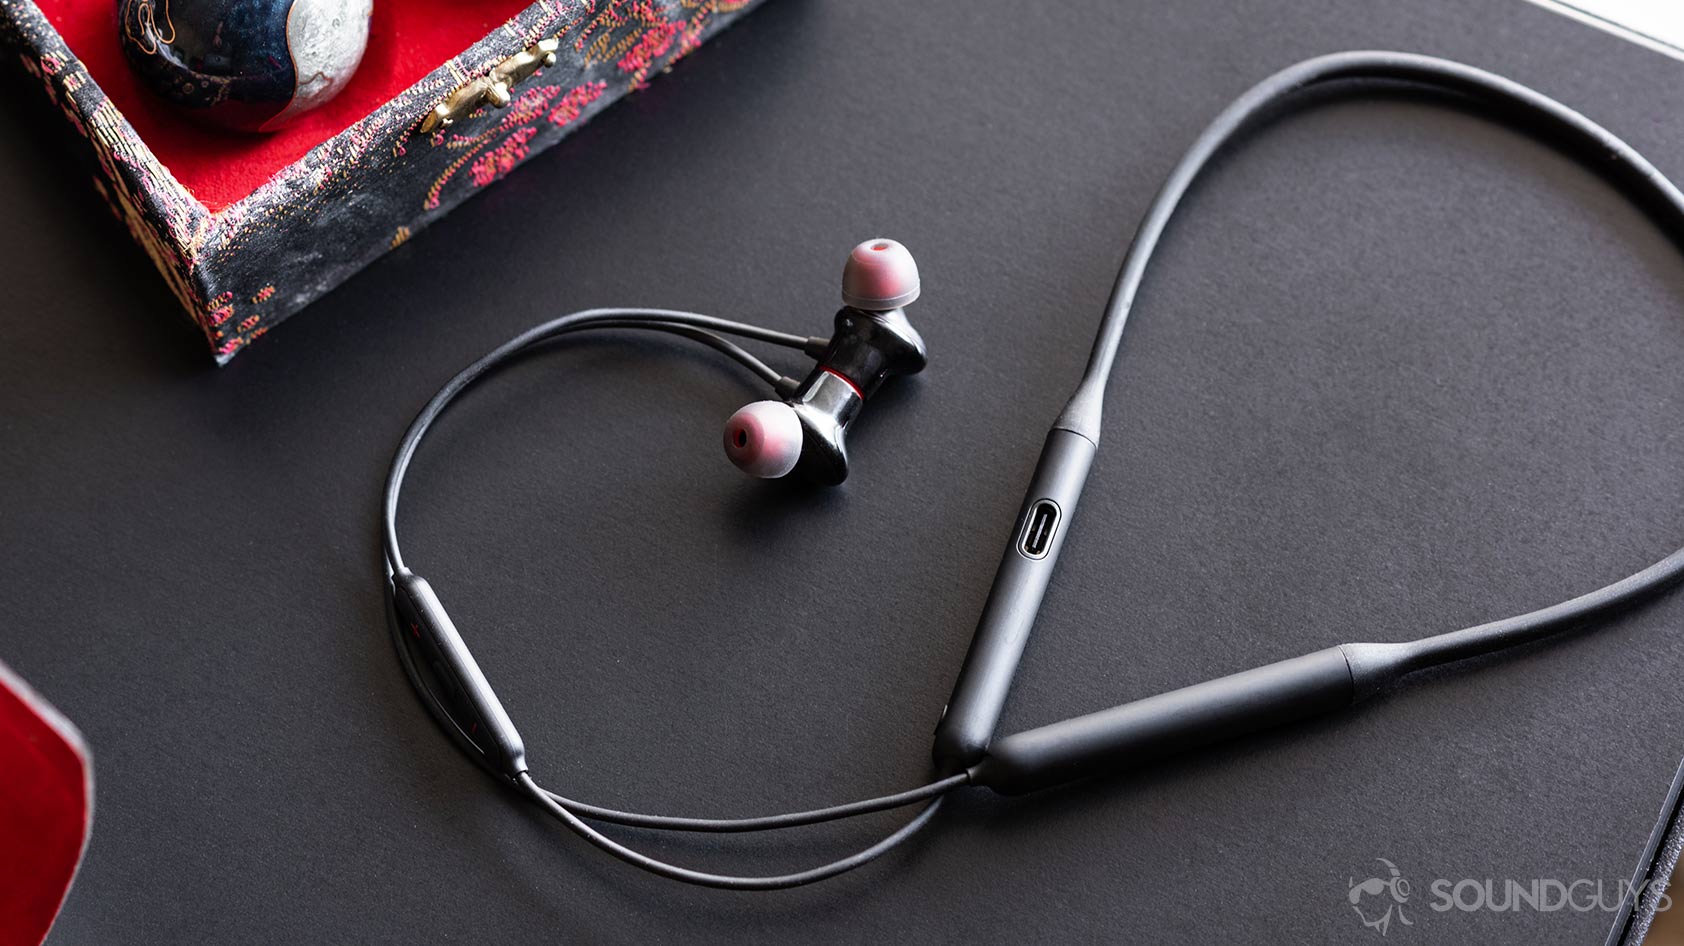 OnePlus Bullets Wireless 2: Full image of the earbuds and neckband with the cable curling up and around on a black table.